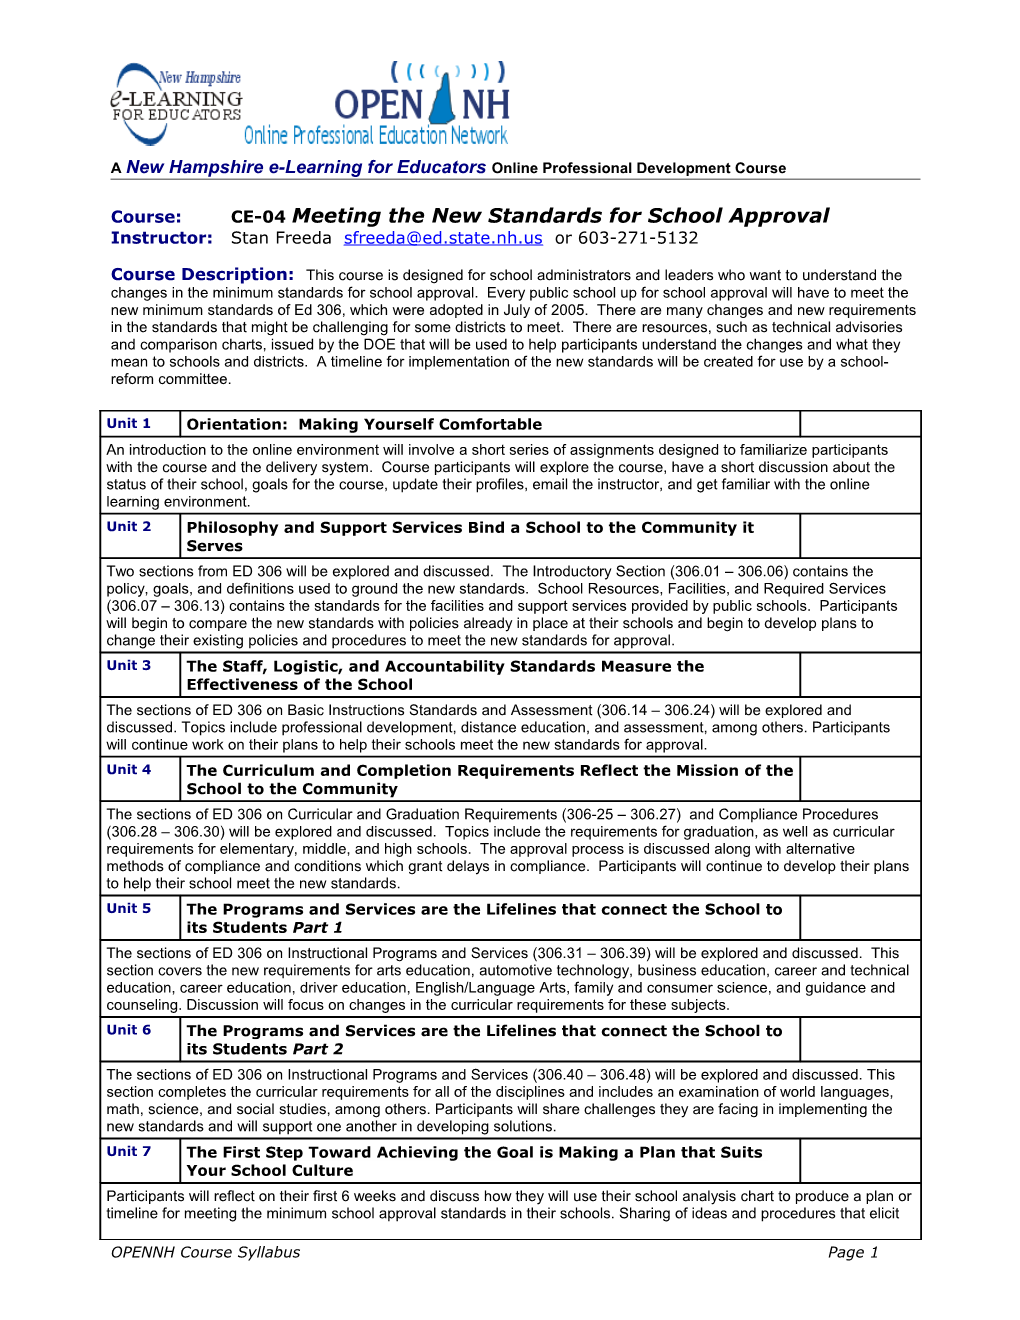 Meeting the New Standards for School Approval